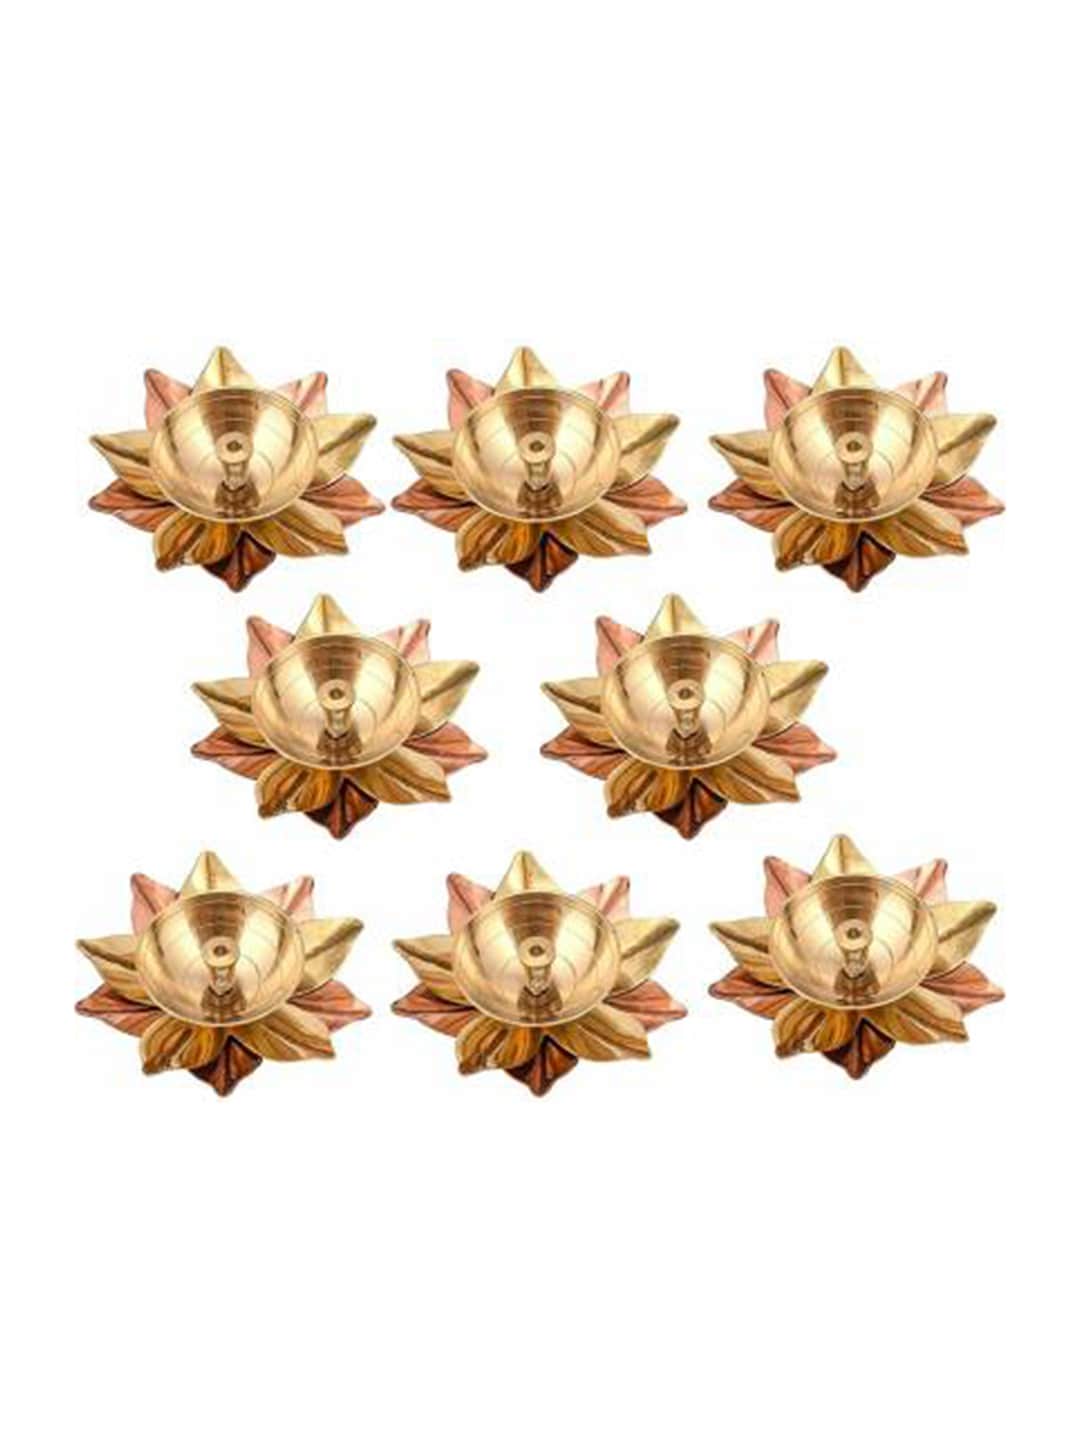 Fashion Bizz Set Of 8 Gold-Toned Solid Akhand Diya In Lotus Shape Price in India